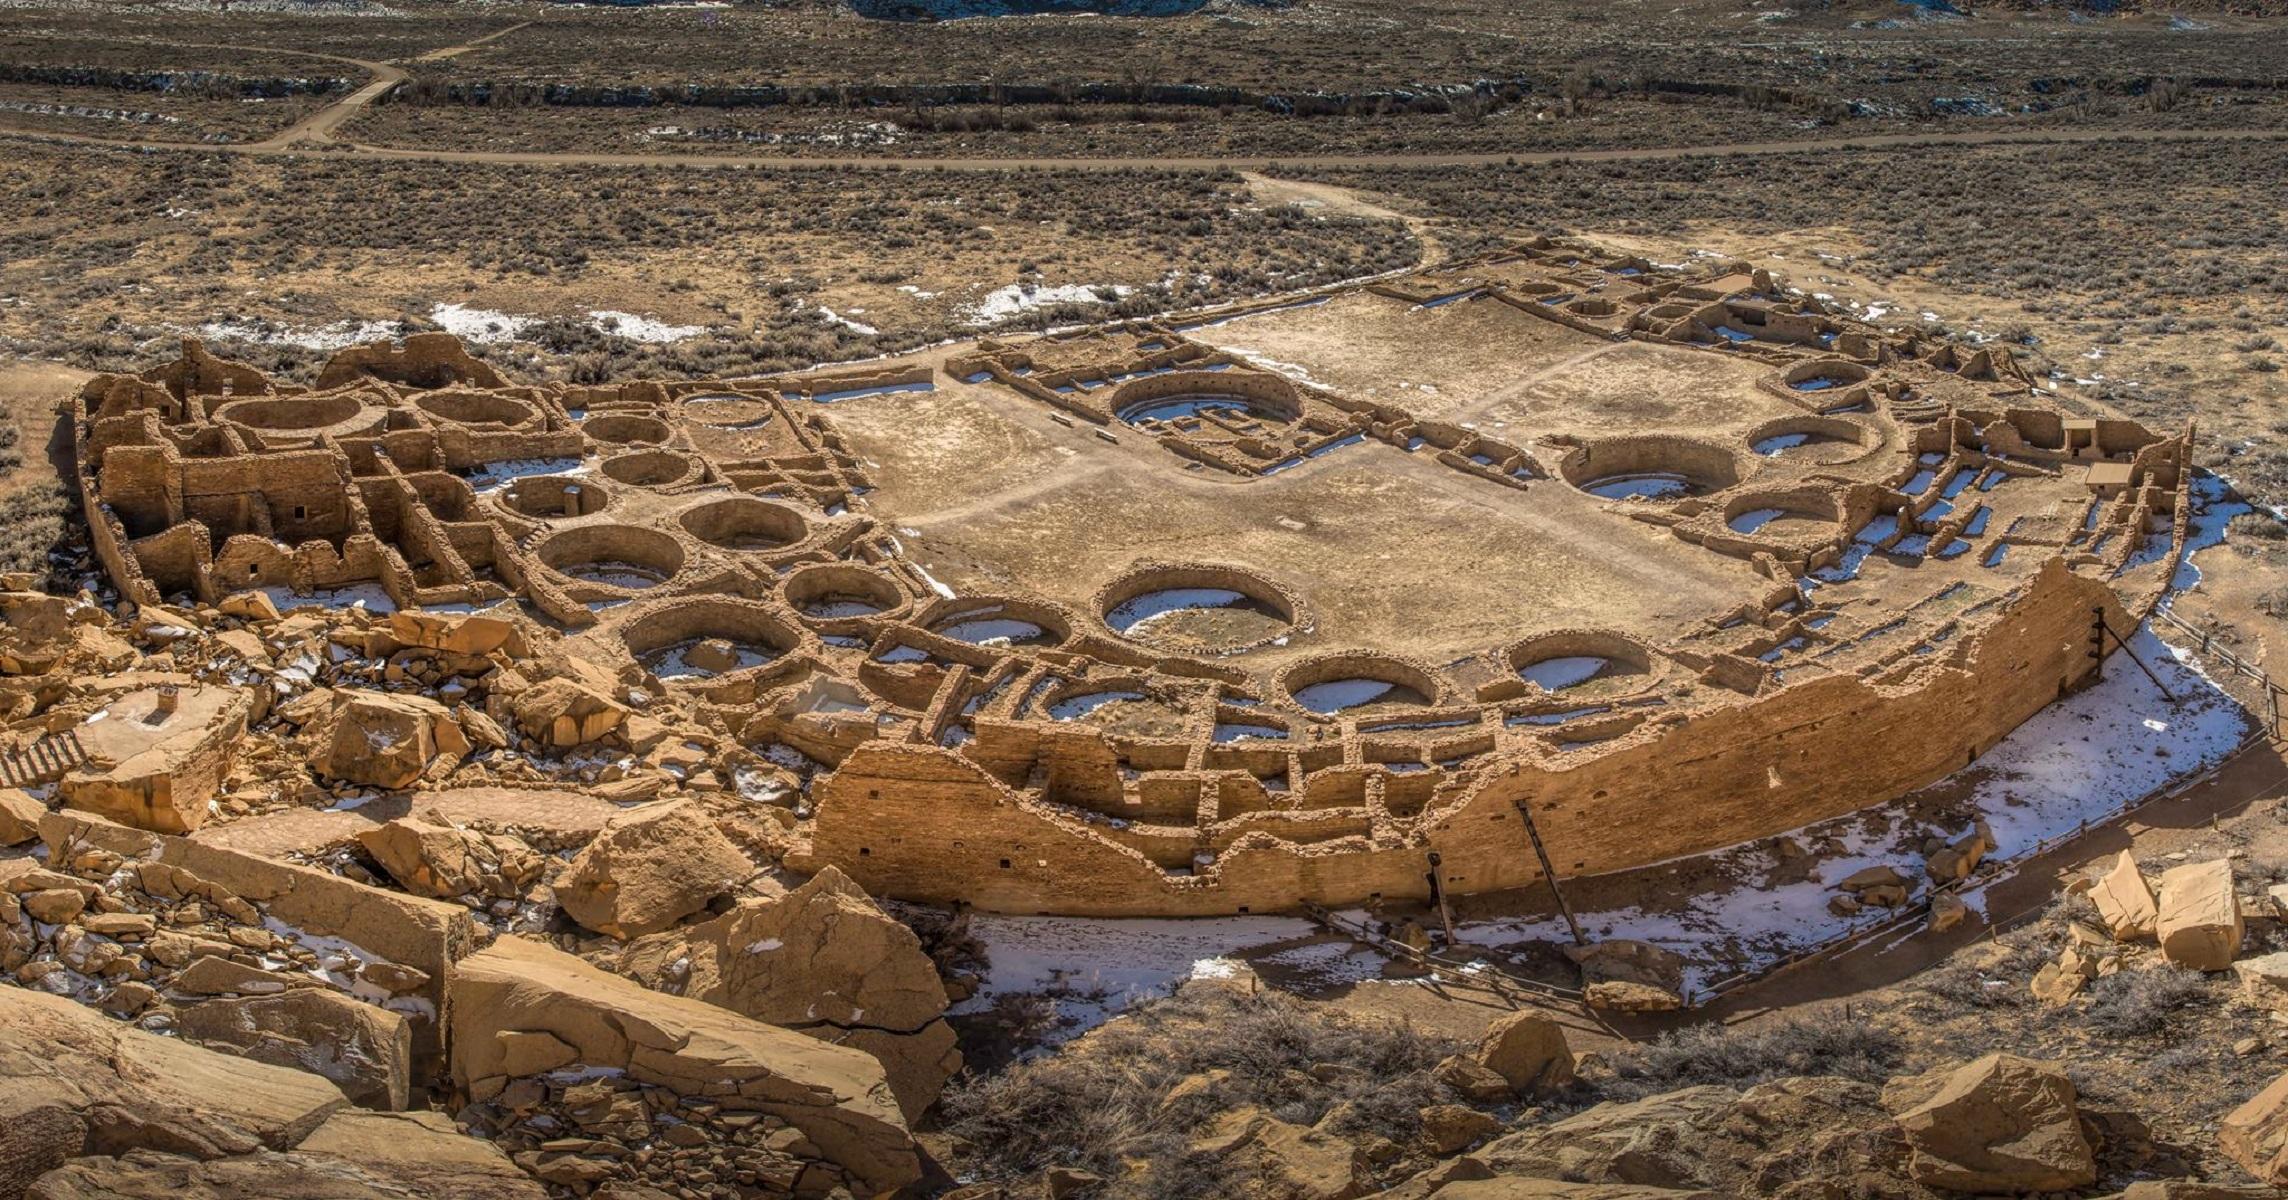 An aerial view of the Pueblo Bonito great house showing many rooms and circular kivas.